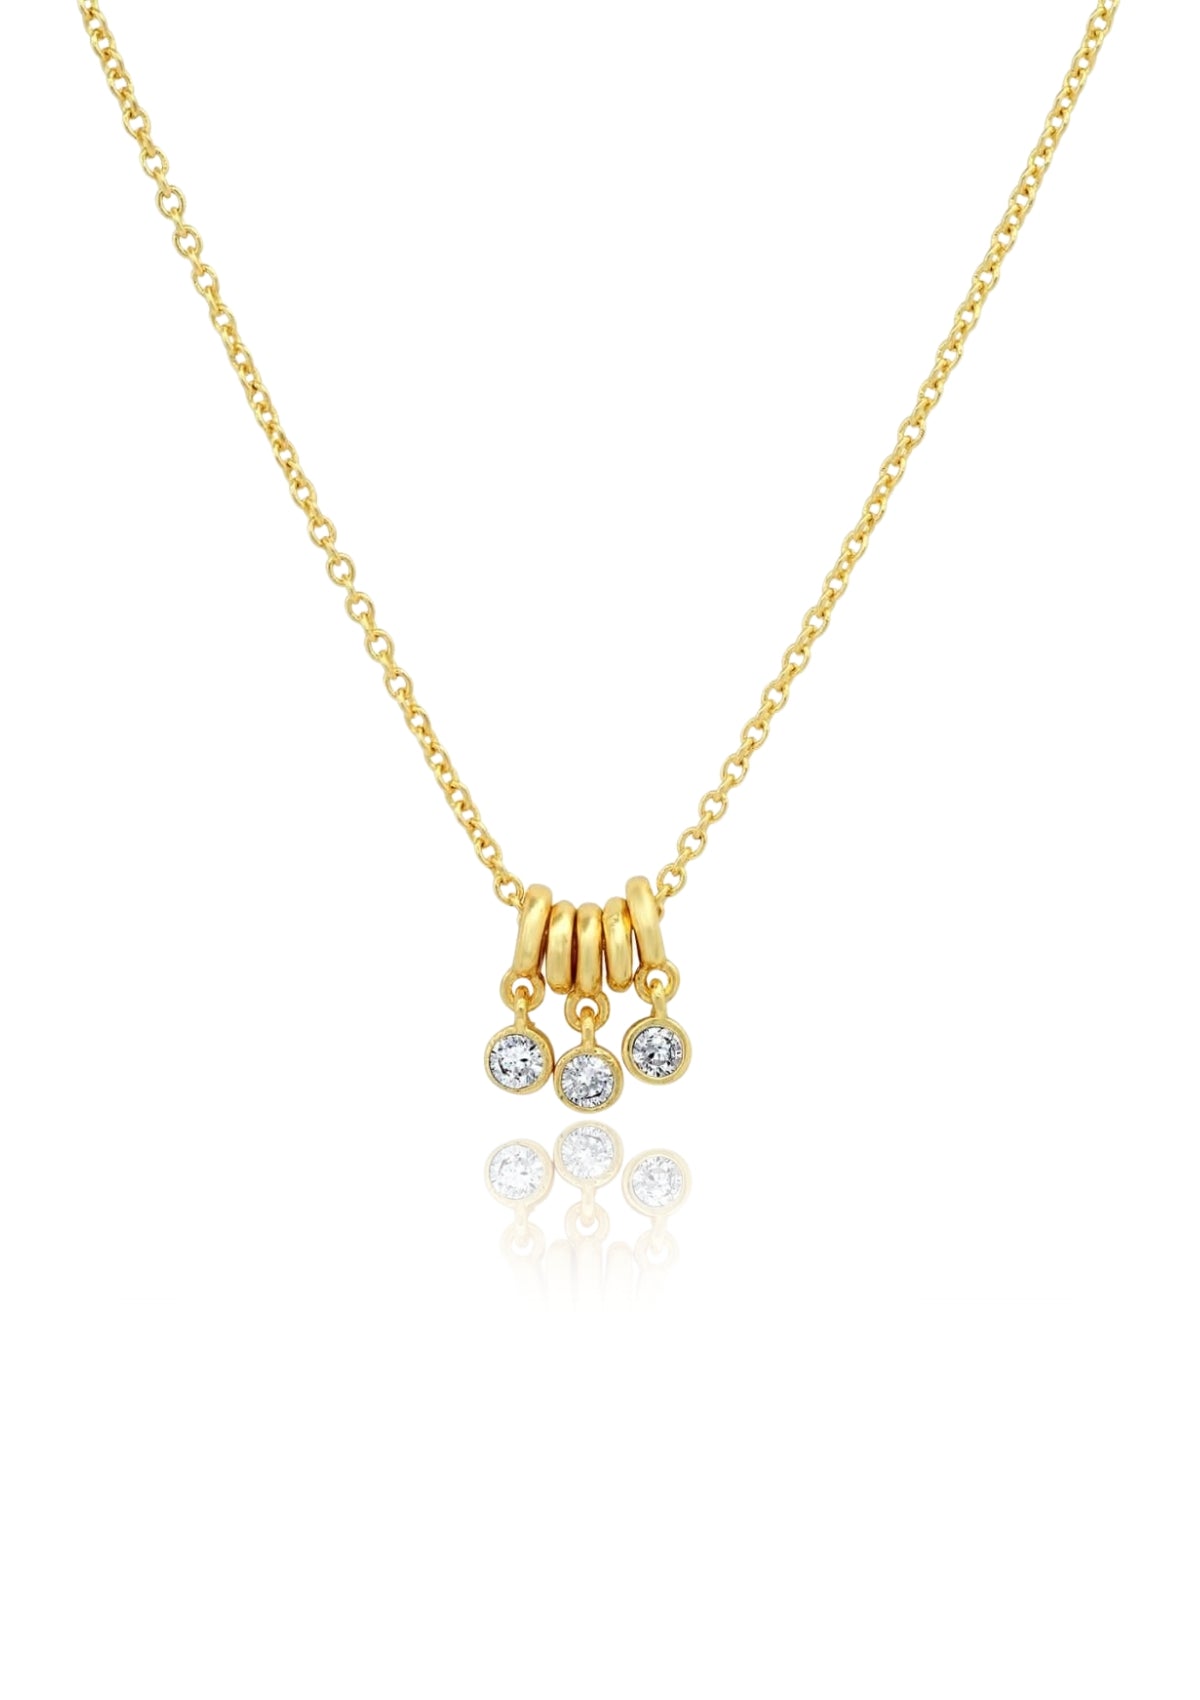 Simple Gold Chain Necklace with Mini Rings and CZ Accent -Tai Rittichai- Ruby Jane-